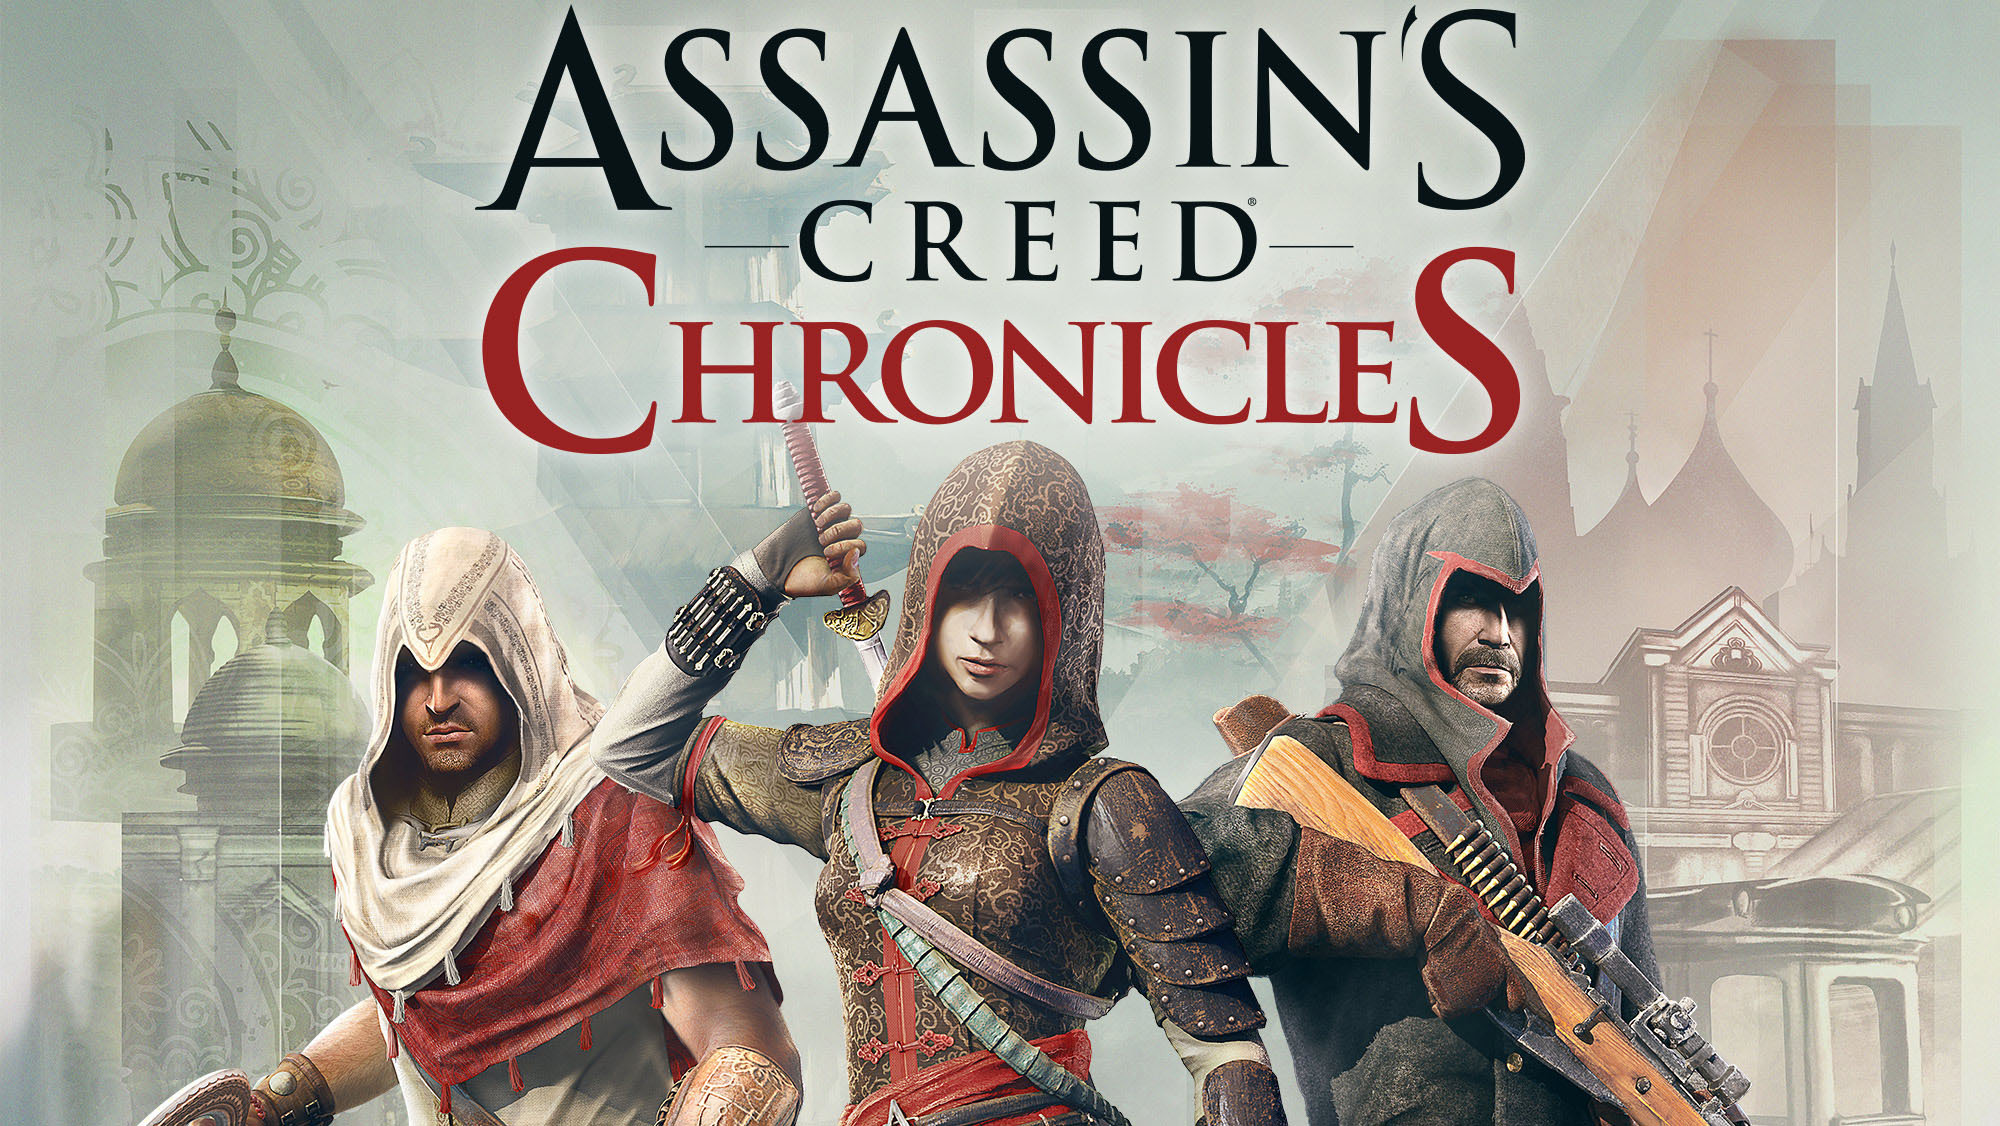 Assassins creed chronicles trilogy steam фото 60